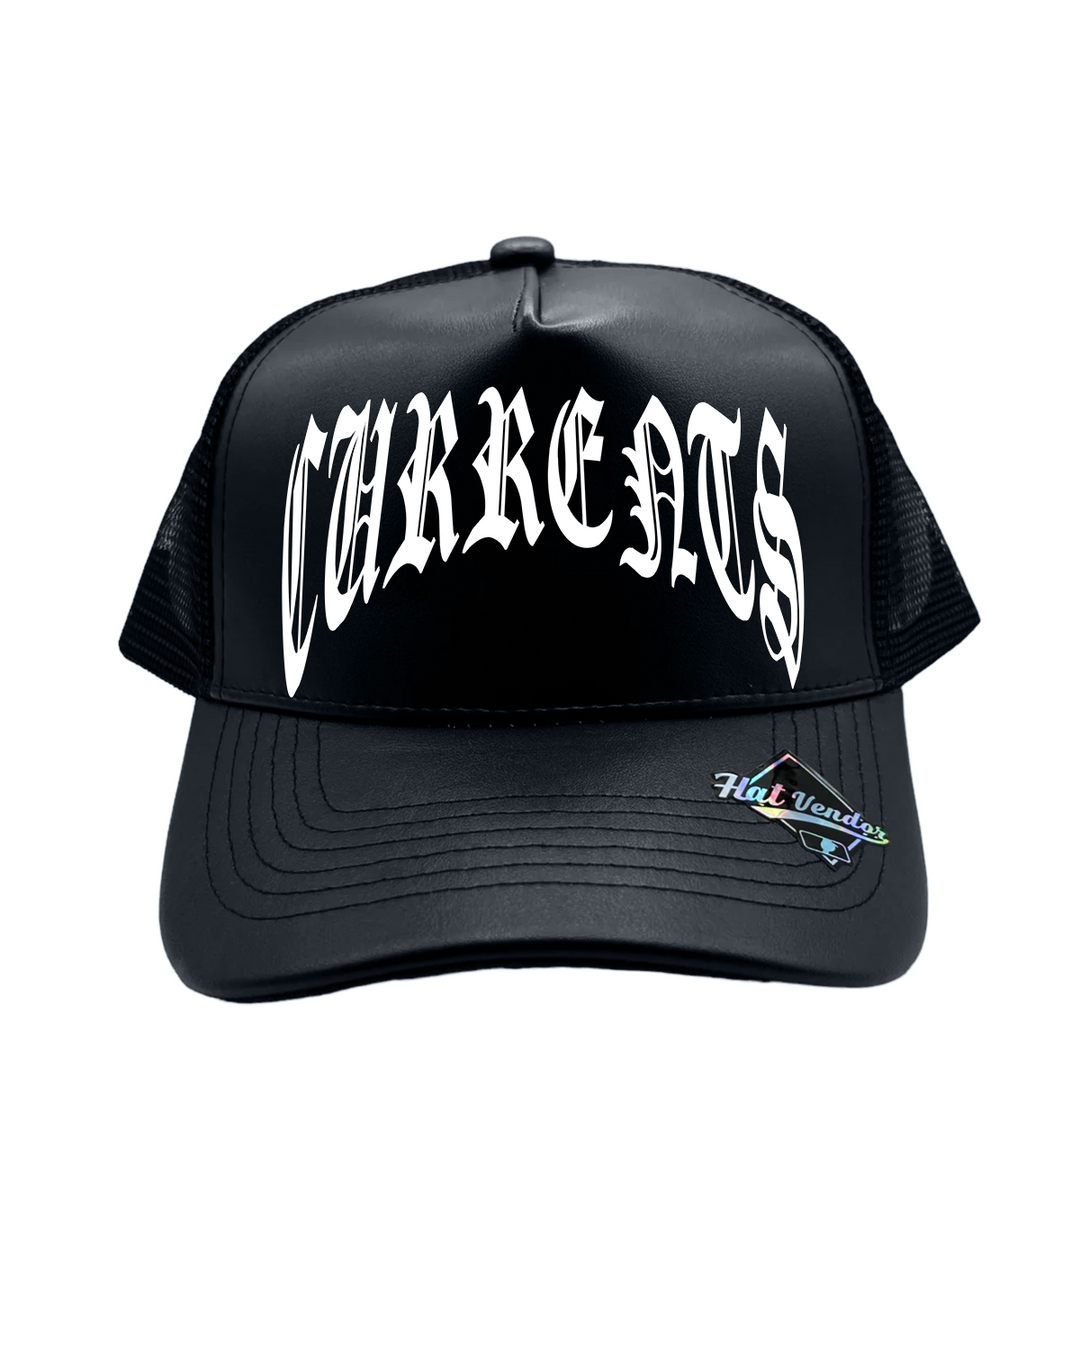 Currents Black Leather Trucker Hat